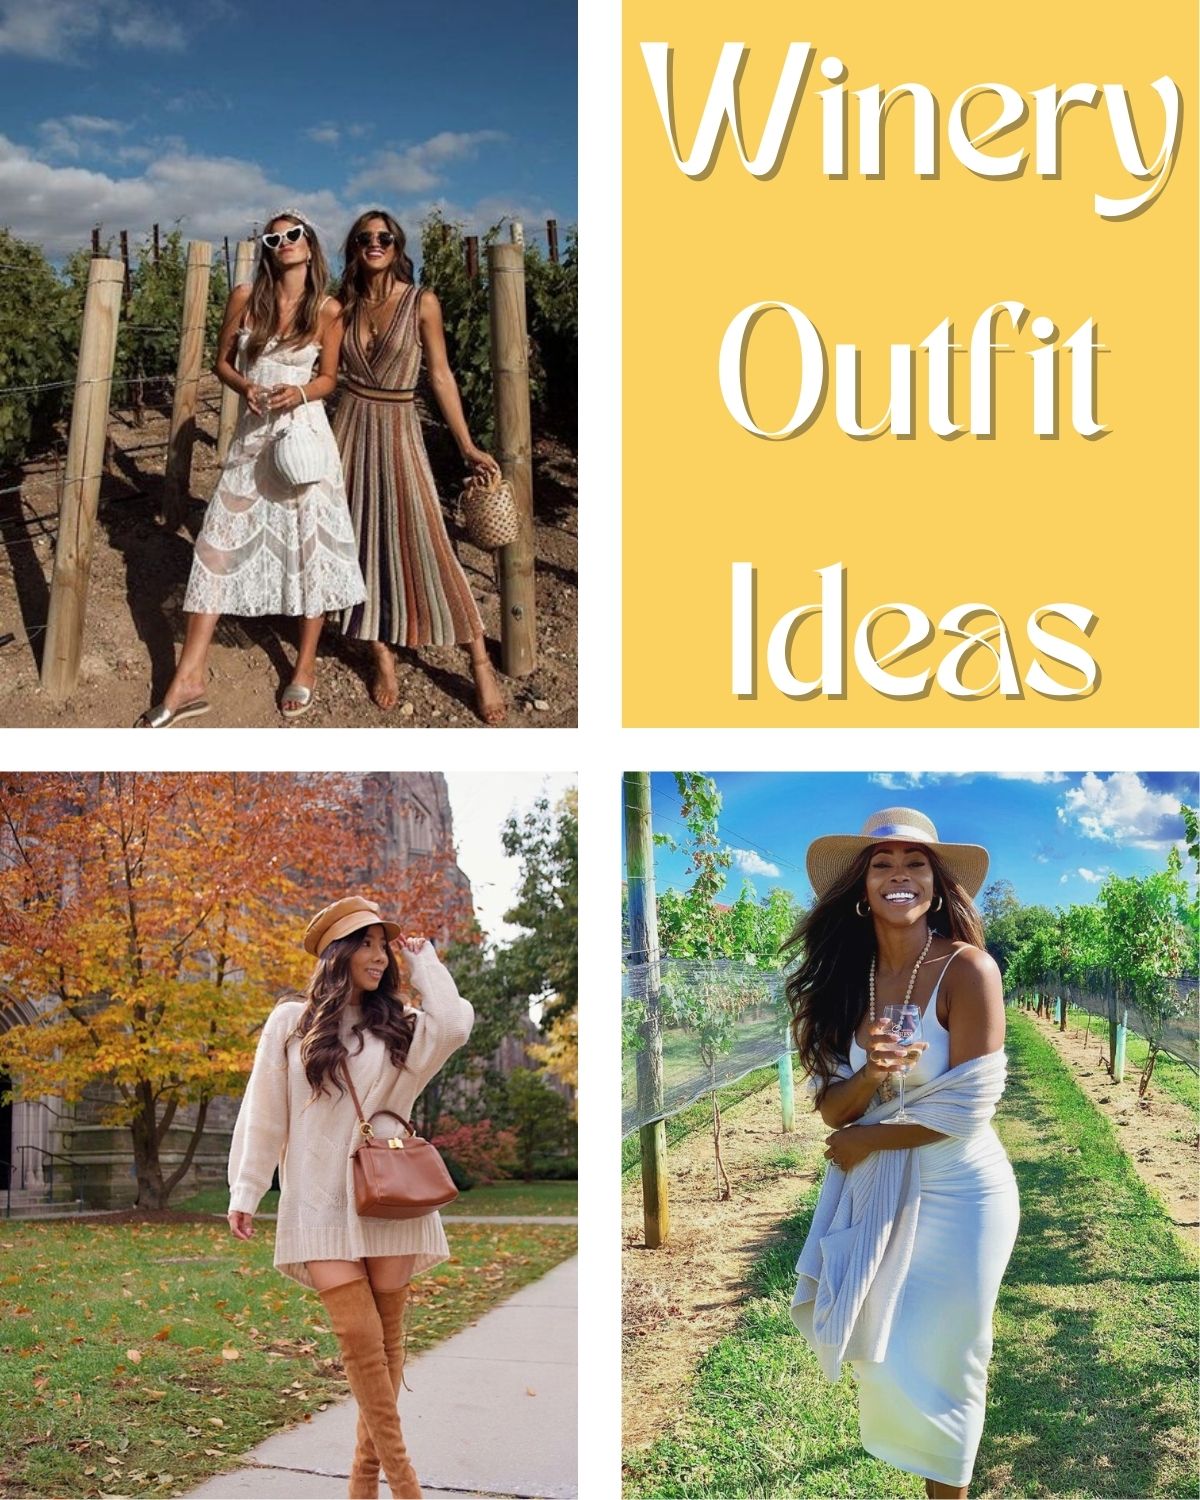 Four women at wineries in cute outfits